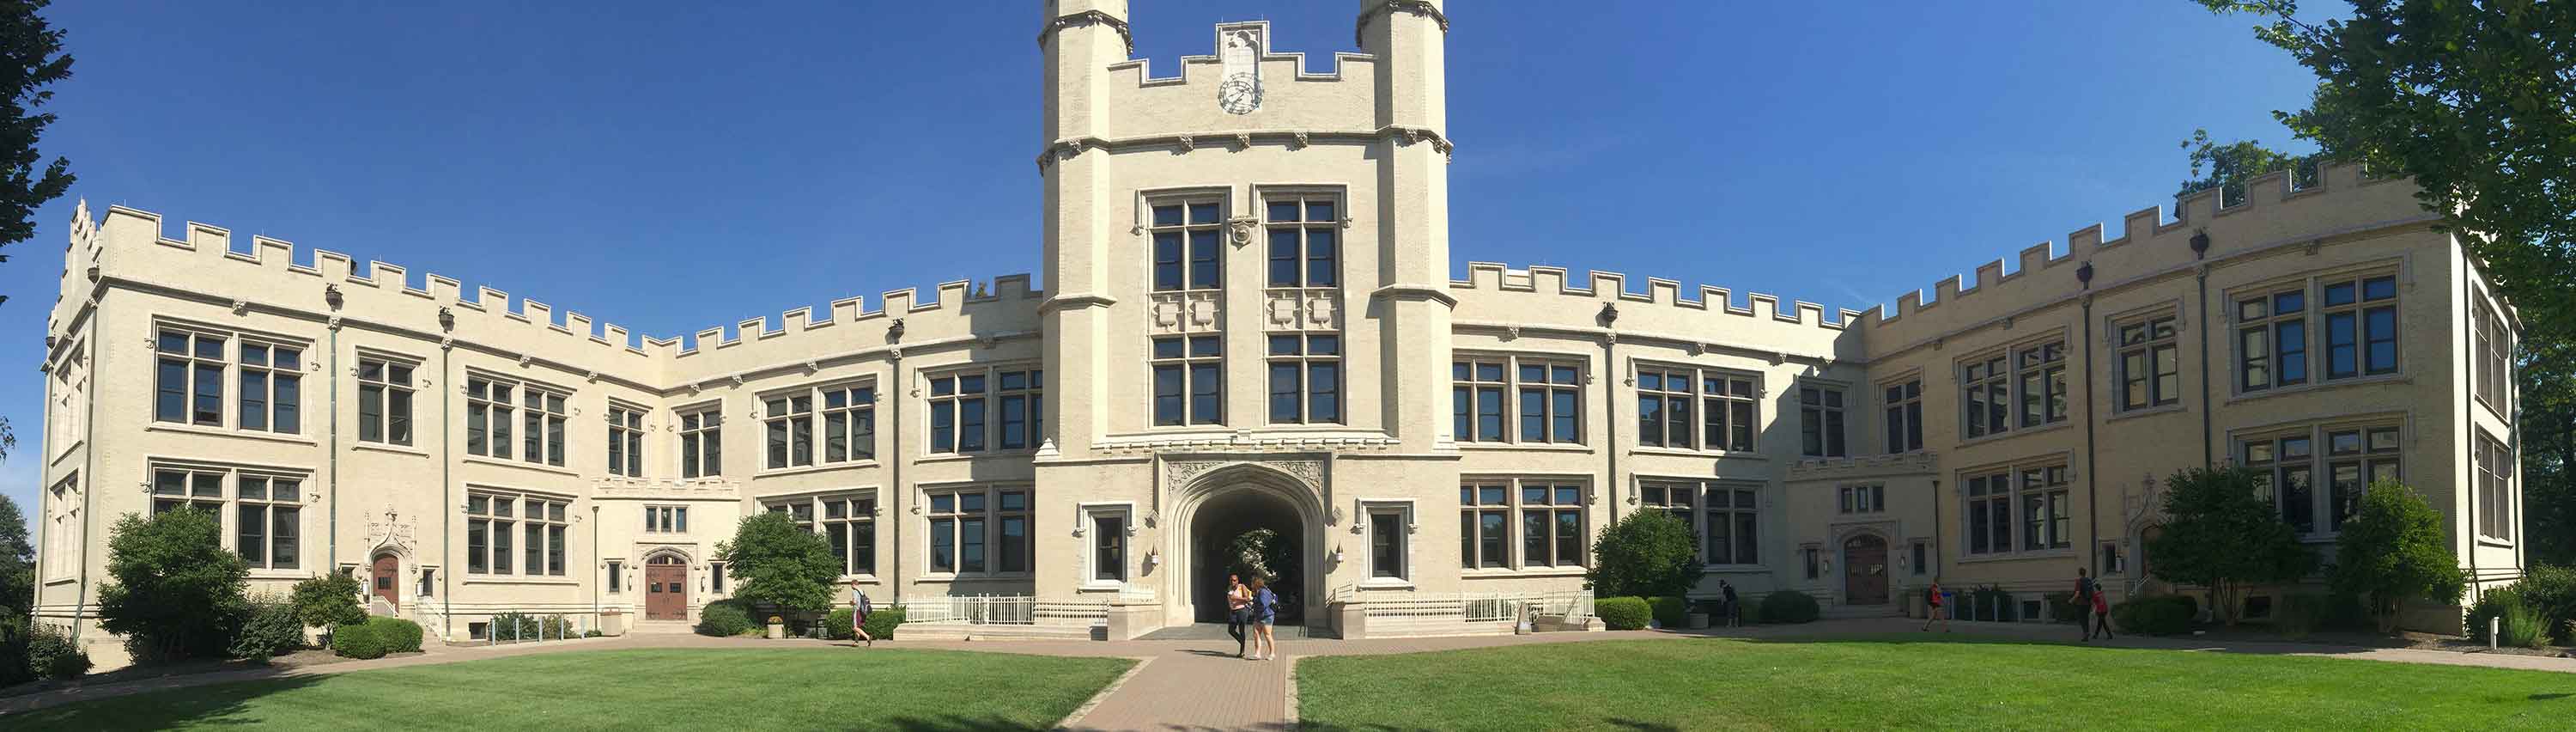 College of Wooster - Wooster, OH